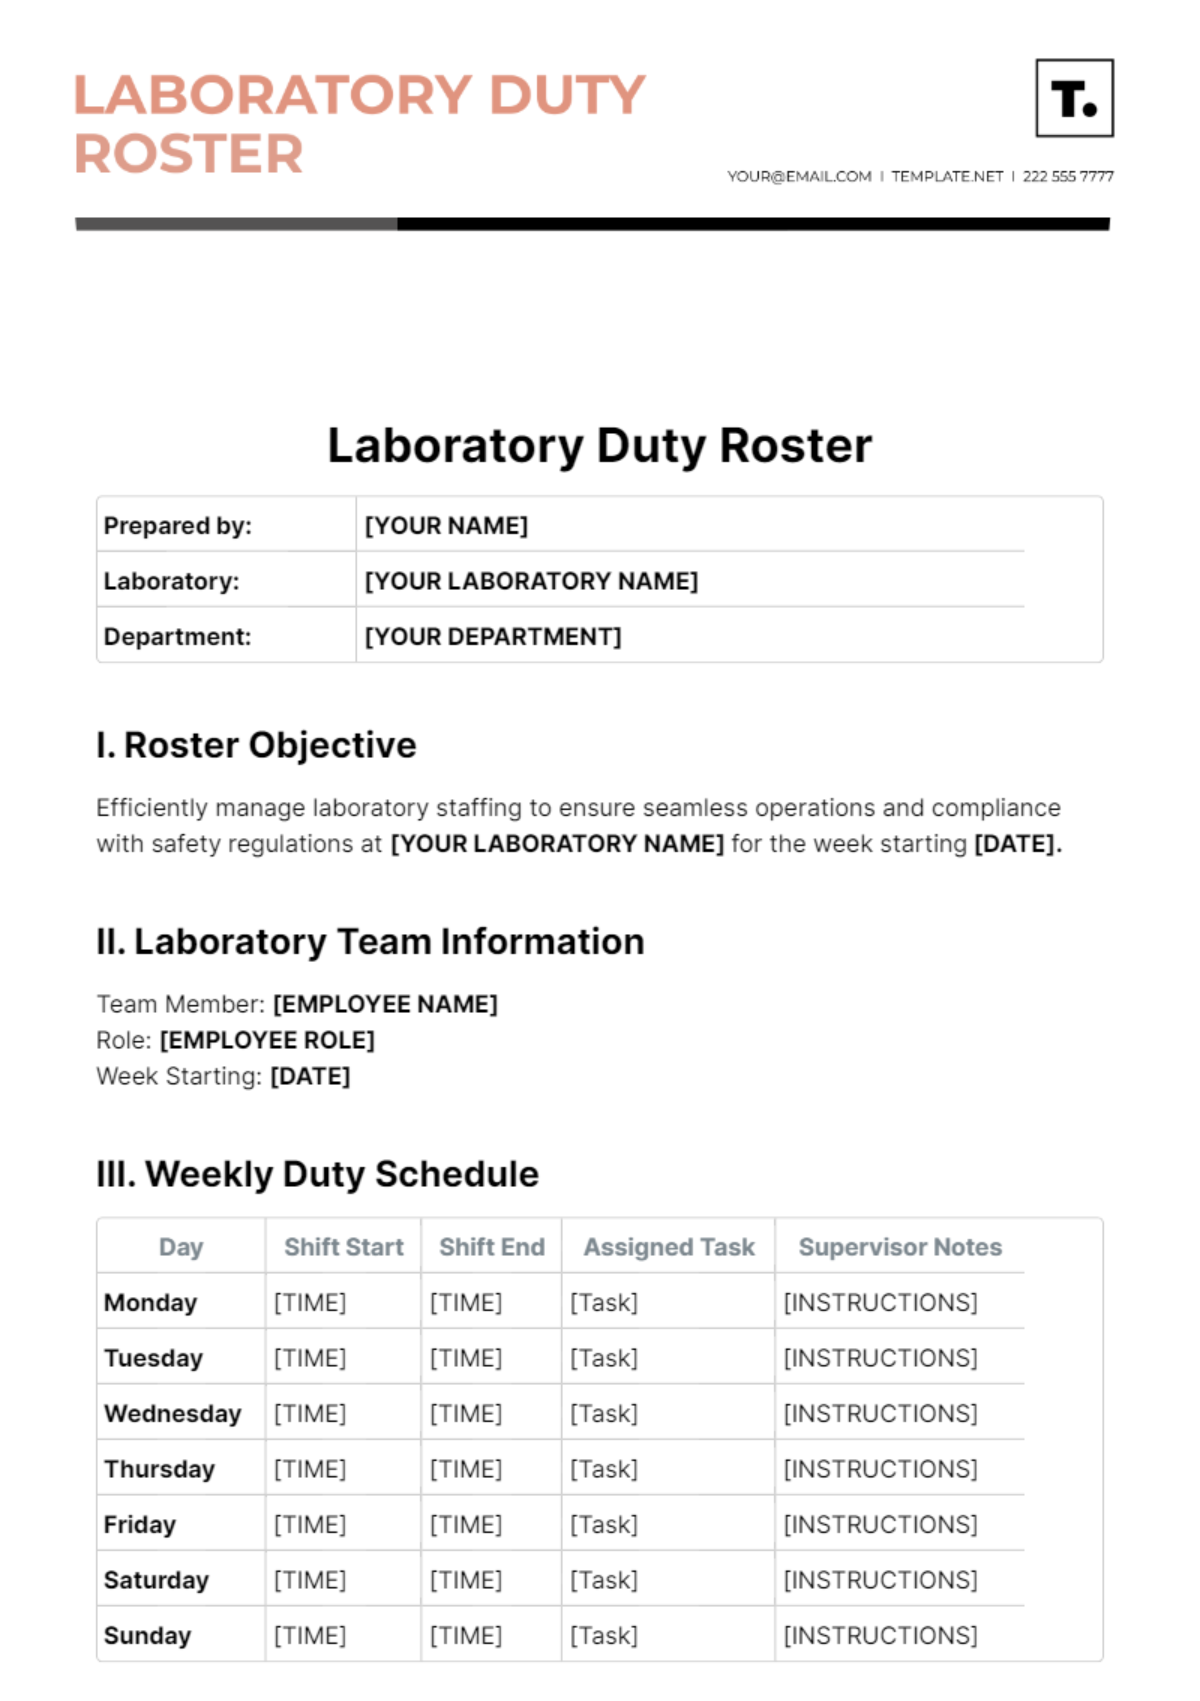 Laboratory Duty Roster Template